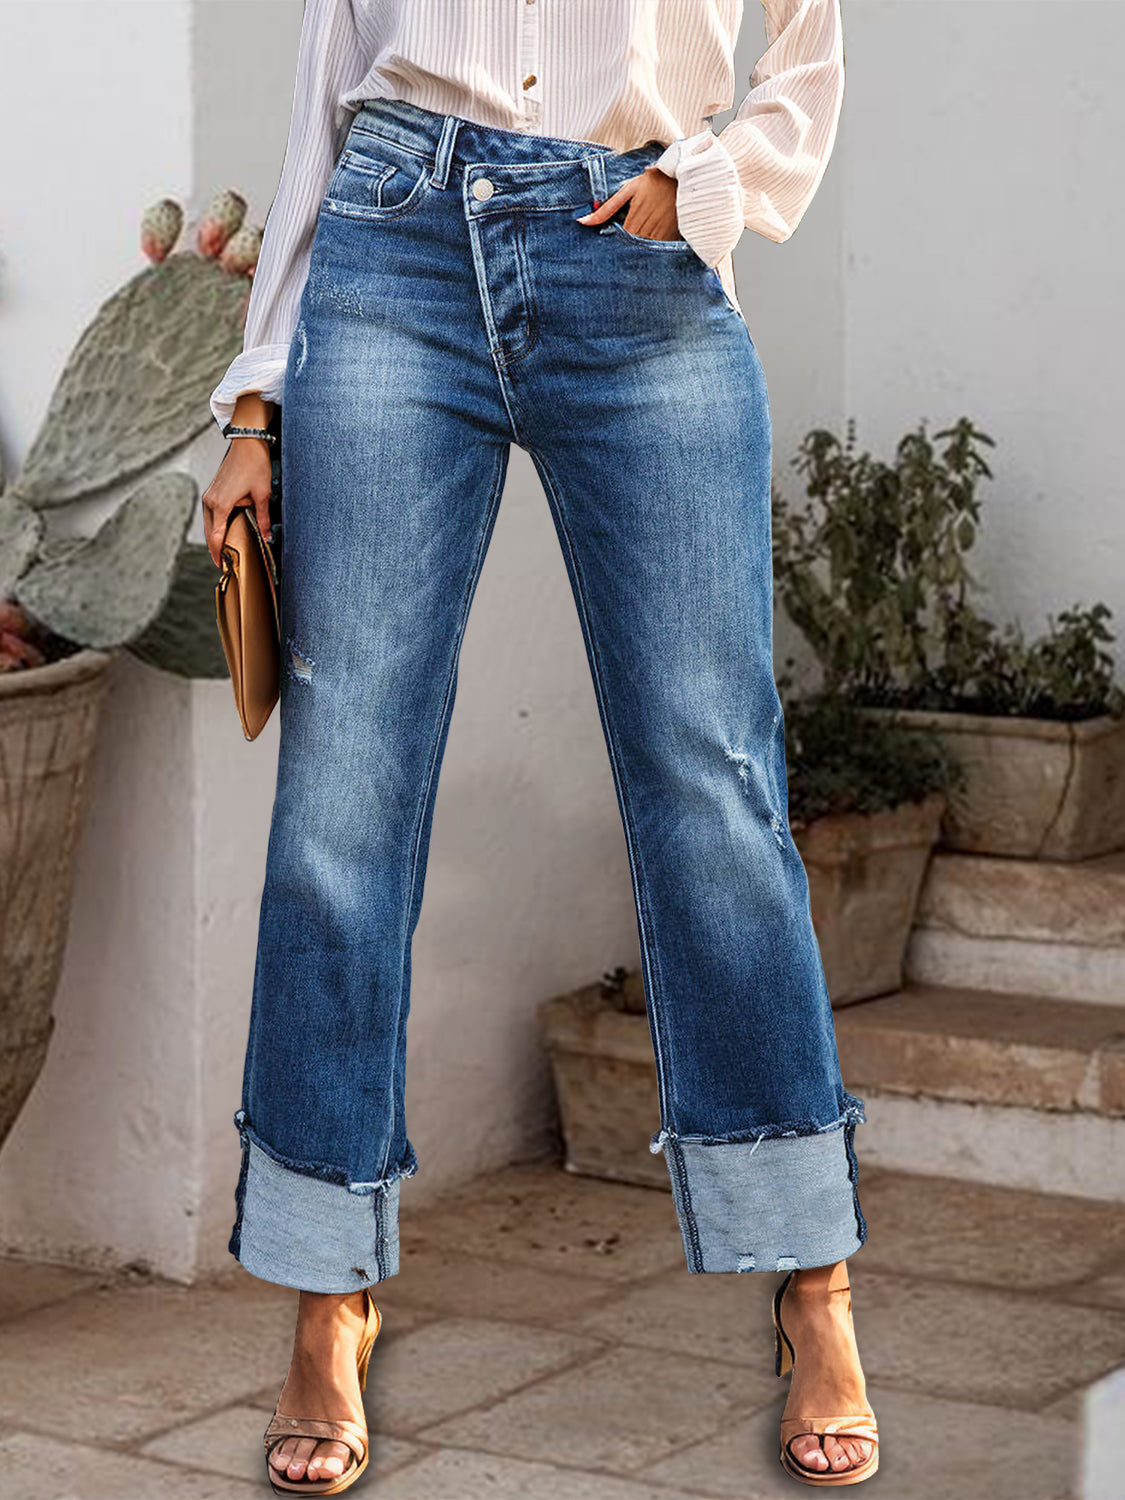 Explore More Collection - Mid-Rise Waist Jeans with Pockets